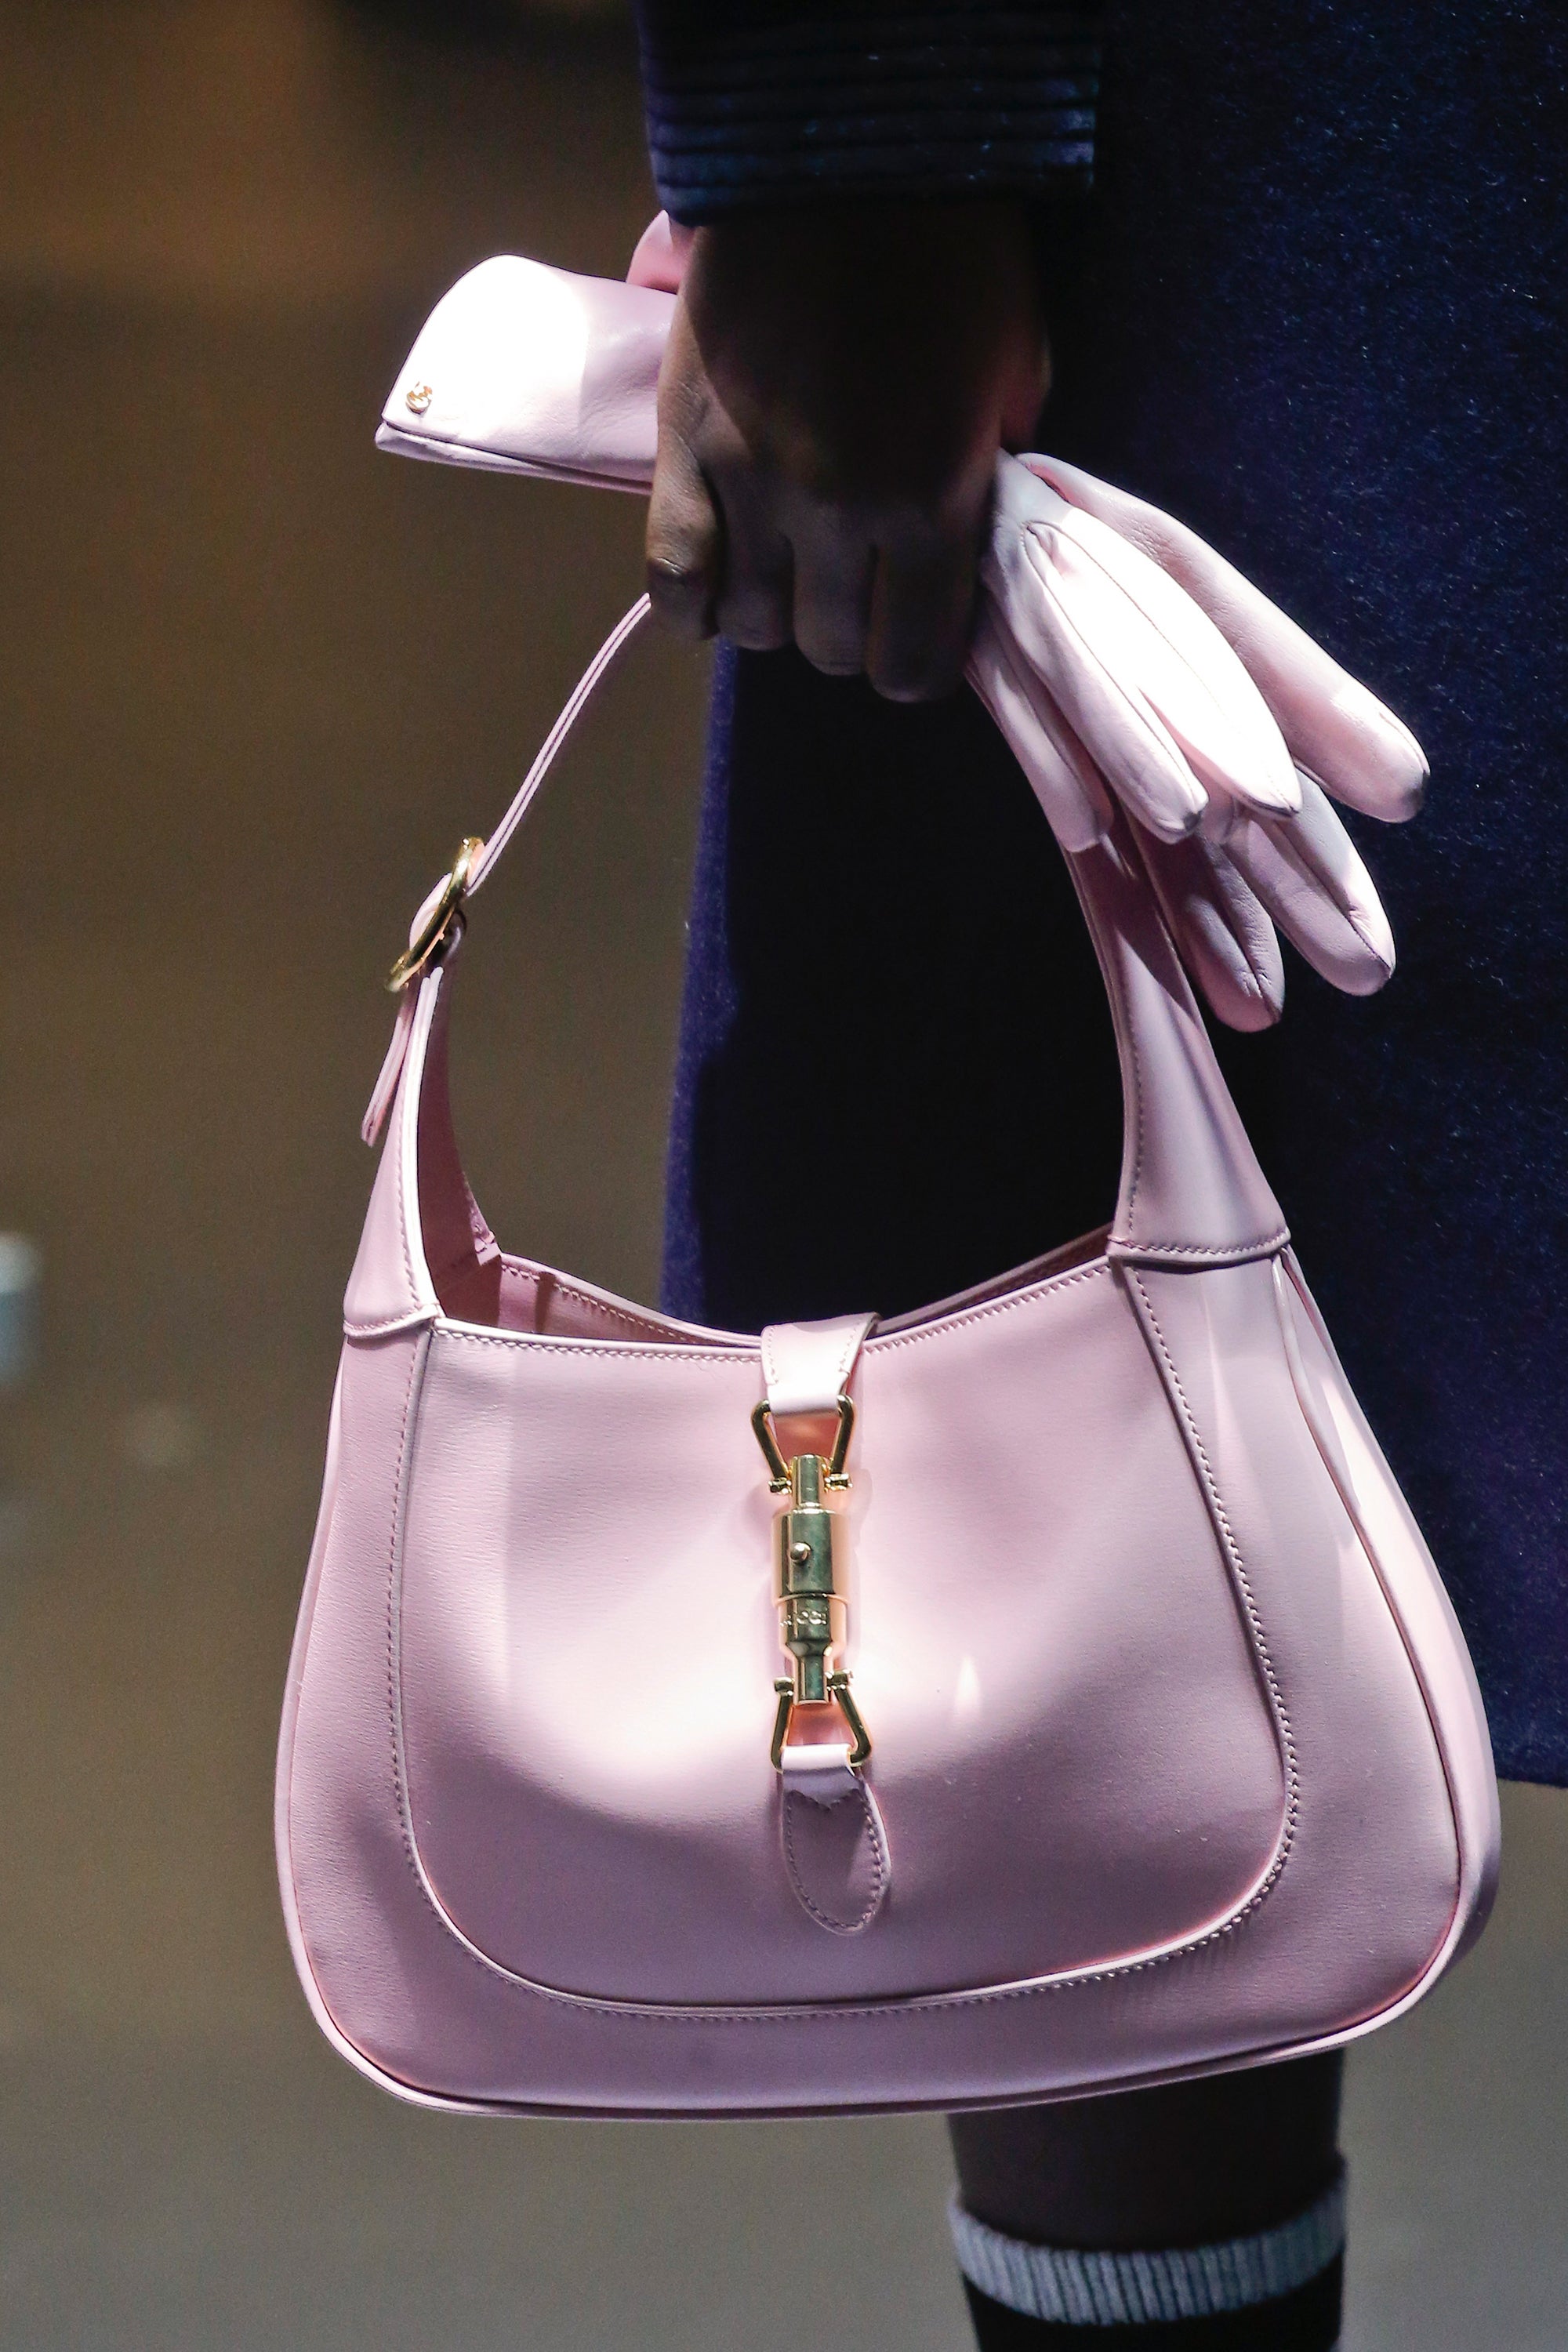 Gucci reintroduces its iconic bag, 'The Jackie